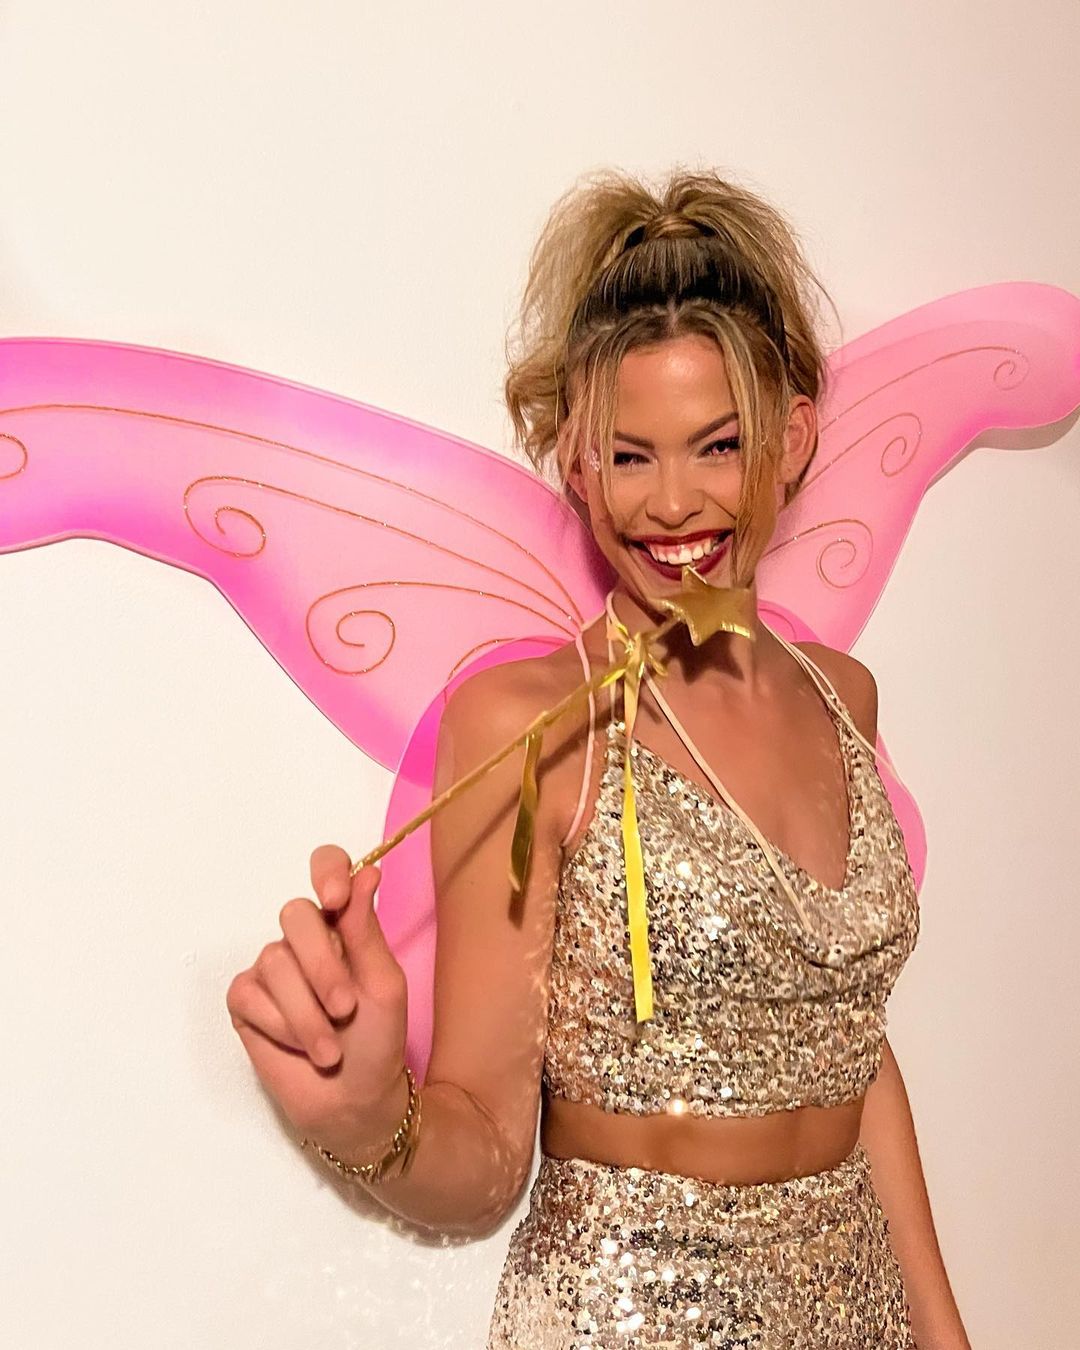 Dutch model and first trans Miss Netherlands poses for a picture wearing a fairy costume and smiling.